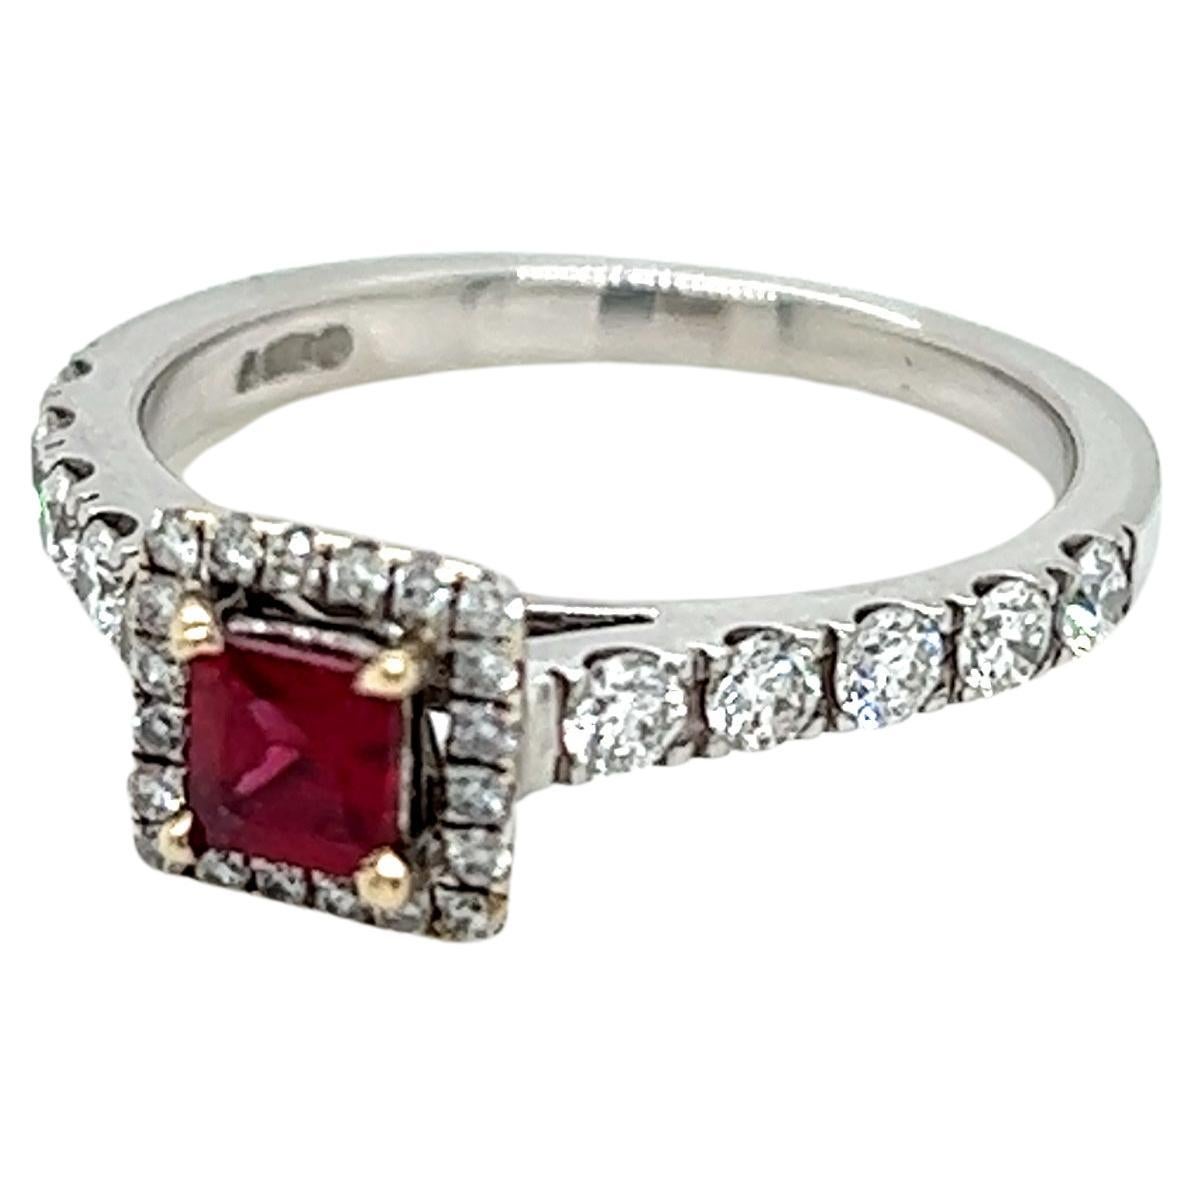 0.27 Carat Princess cut Ruby and Diamond ring in Platinum and Yellow Gold